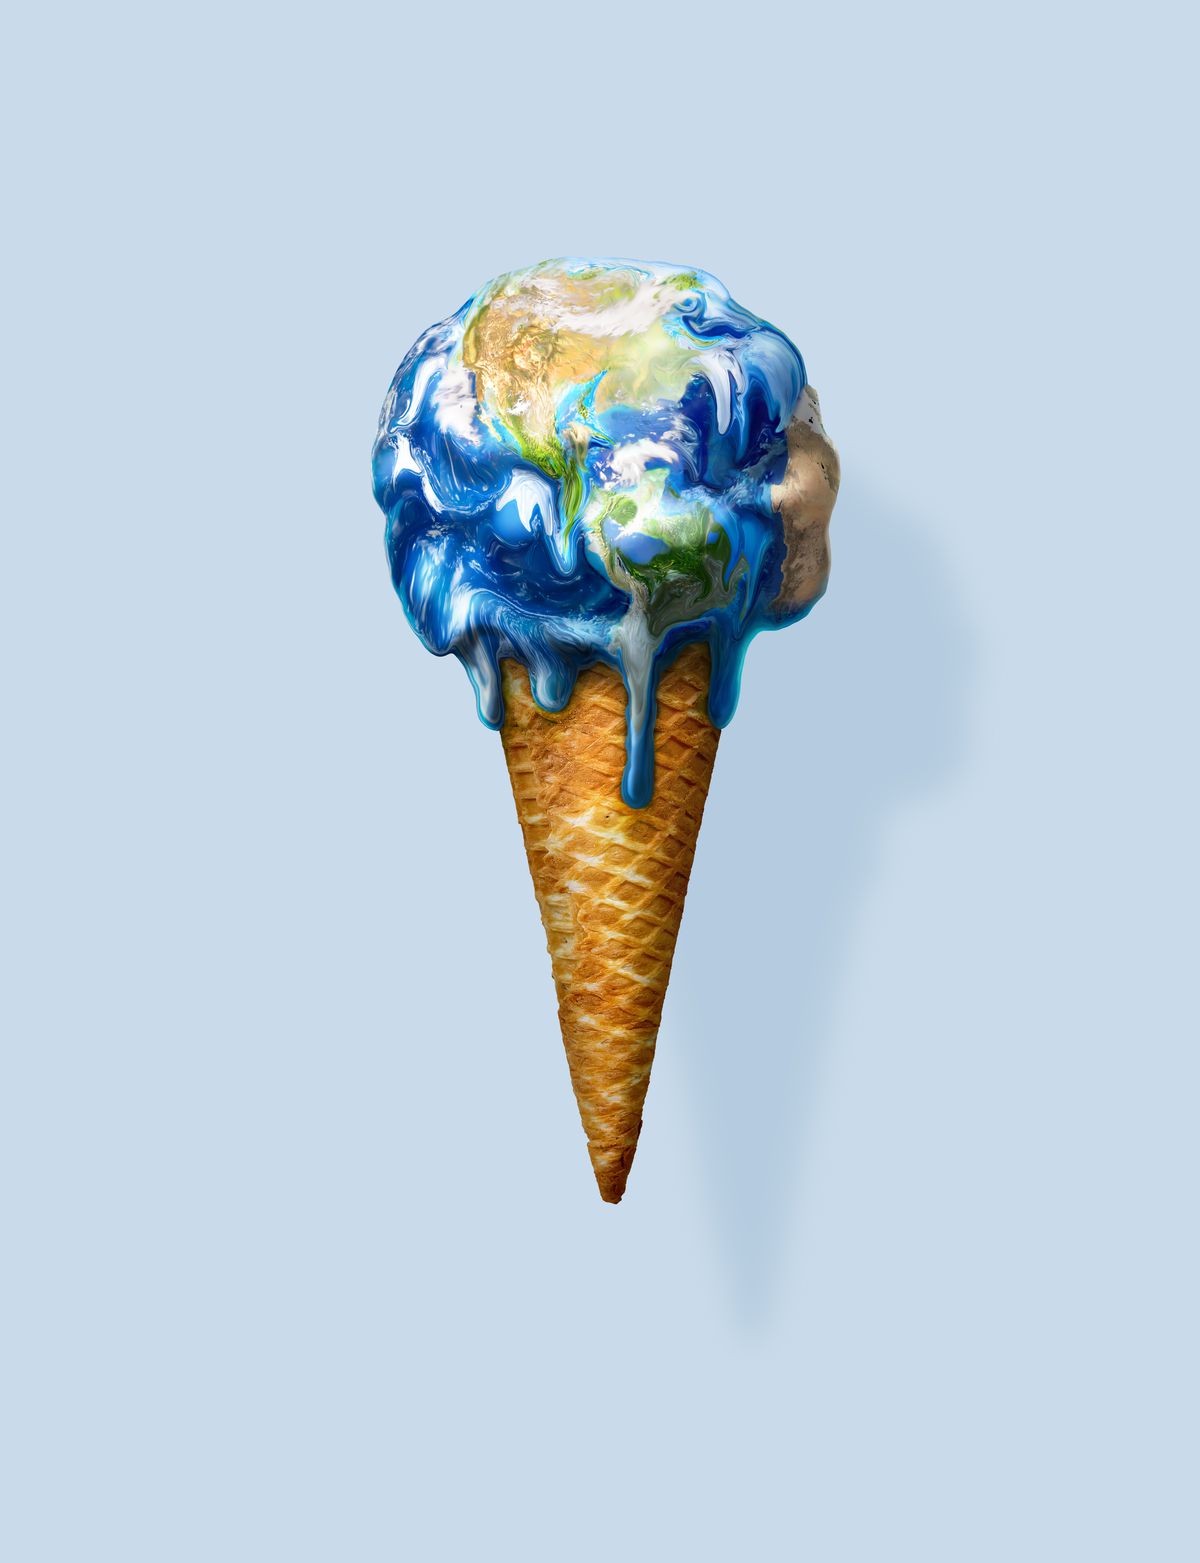 Stock photo of melting ice cream cone colored to look like the planet Earth.